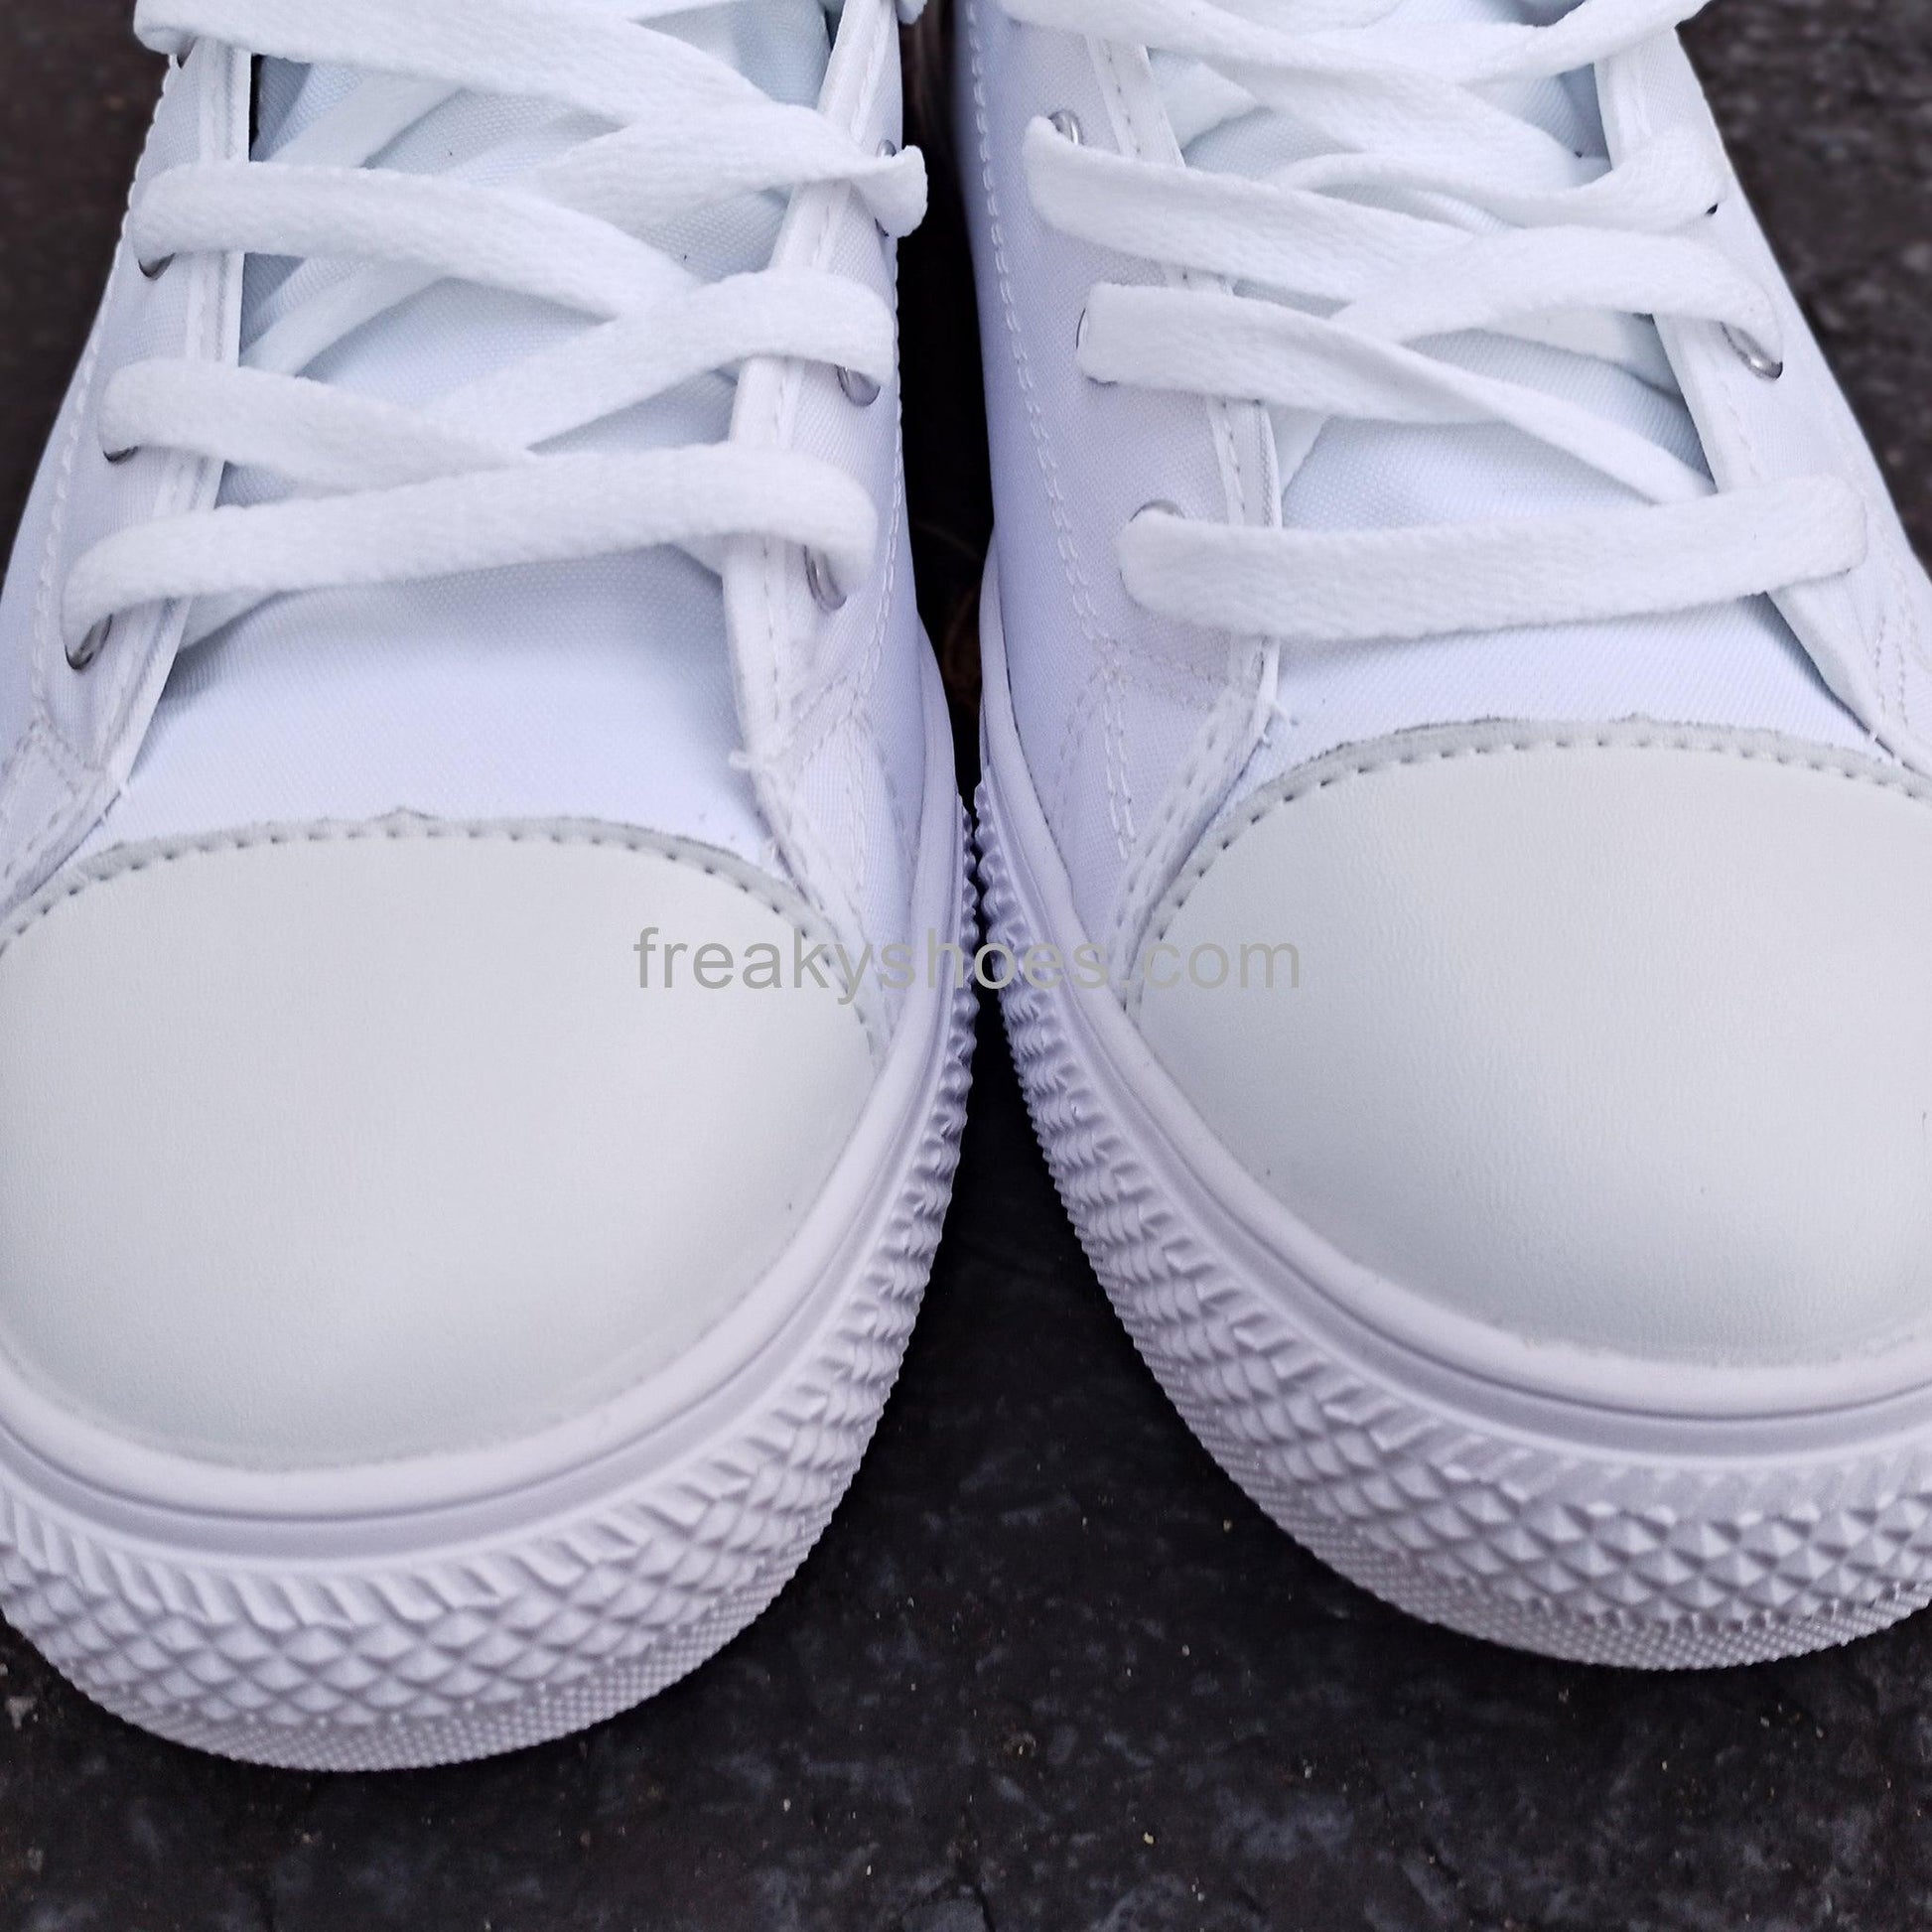 Freaky Shoes Women - Freaky Shoes®